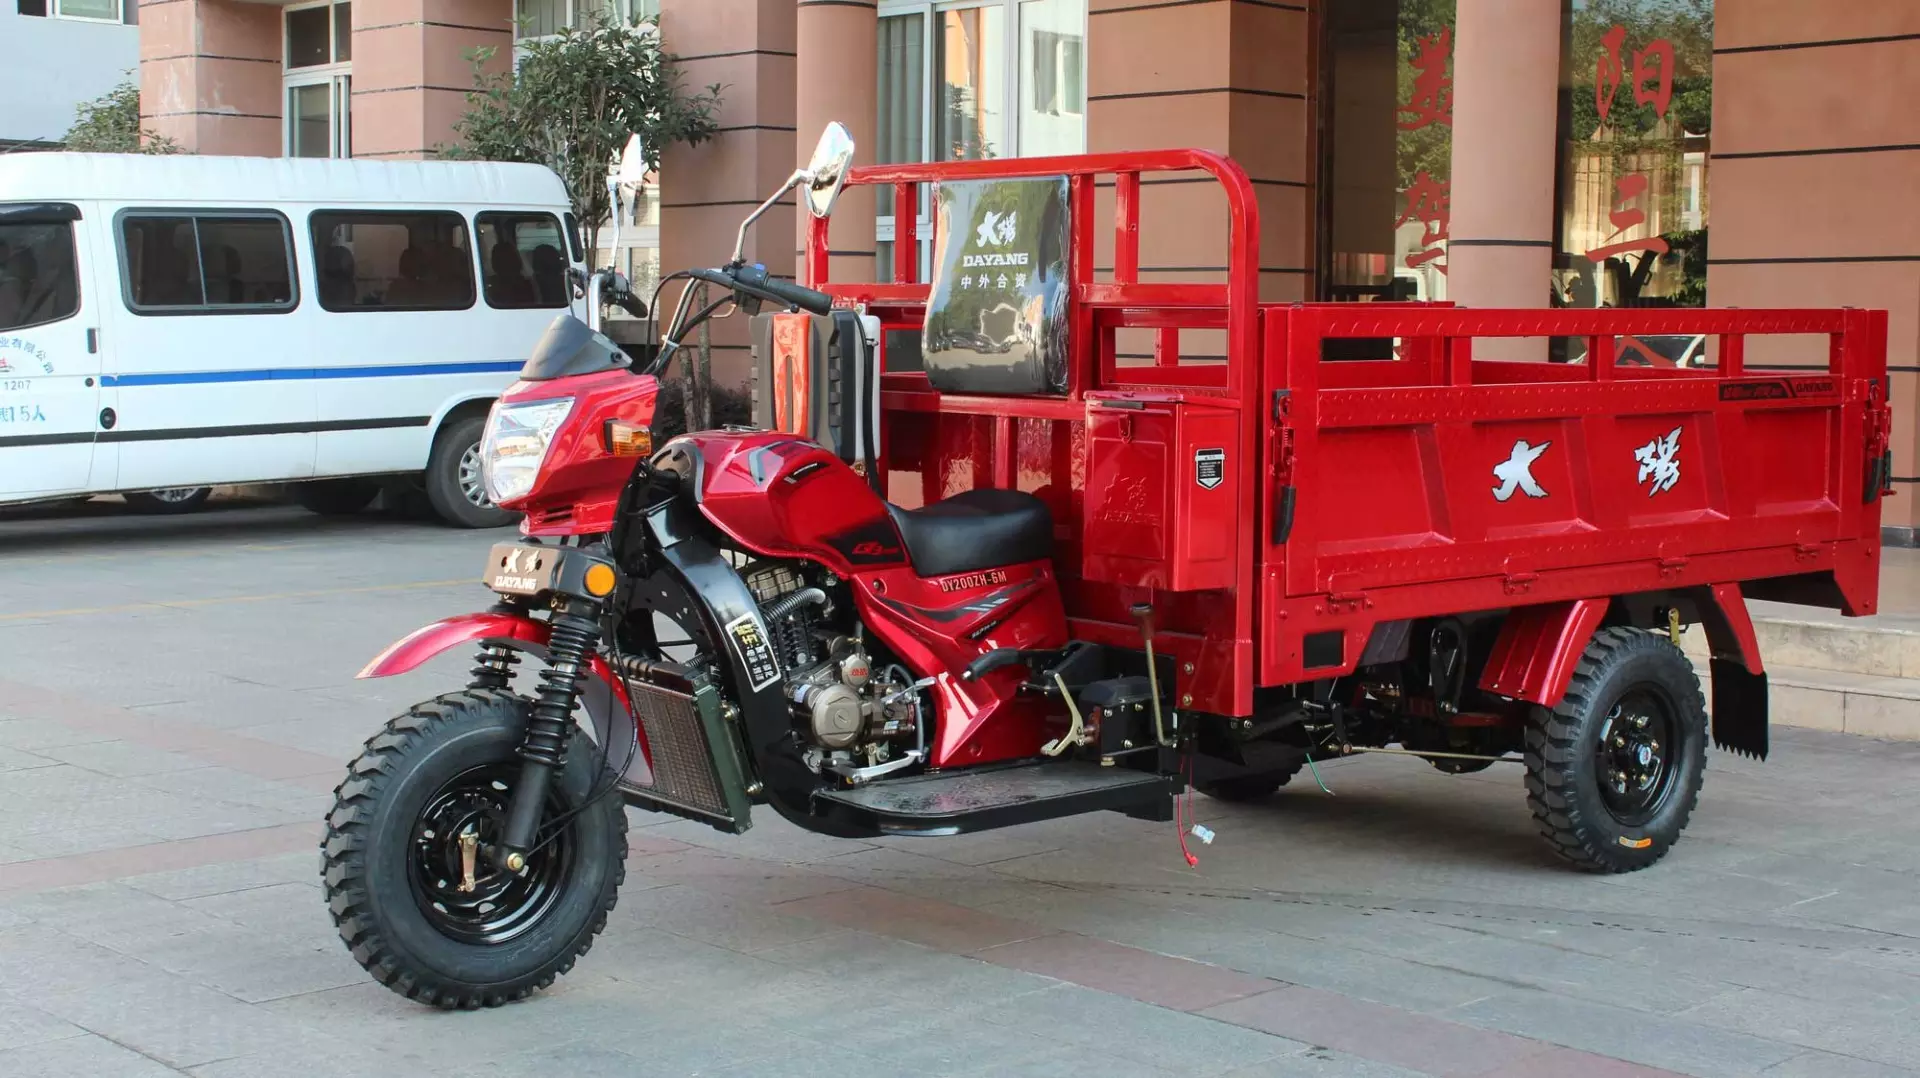 New Luxury Motorcycle Motorized Gas Power good design truck chinese cargo sudan motor tricycle trimoto engine 200cc